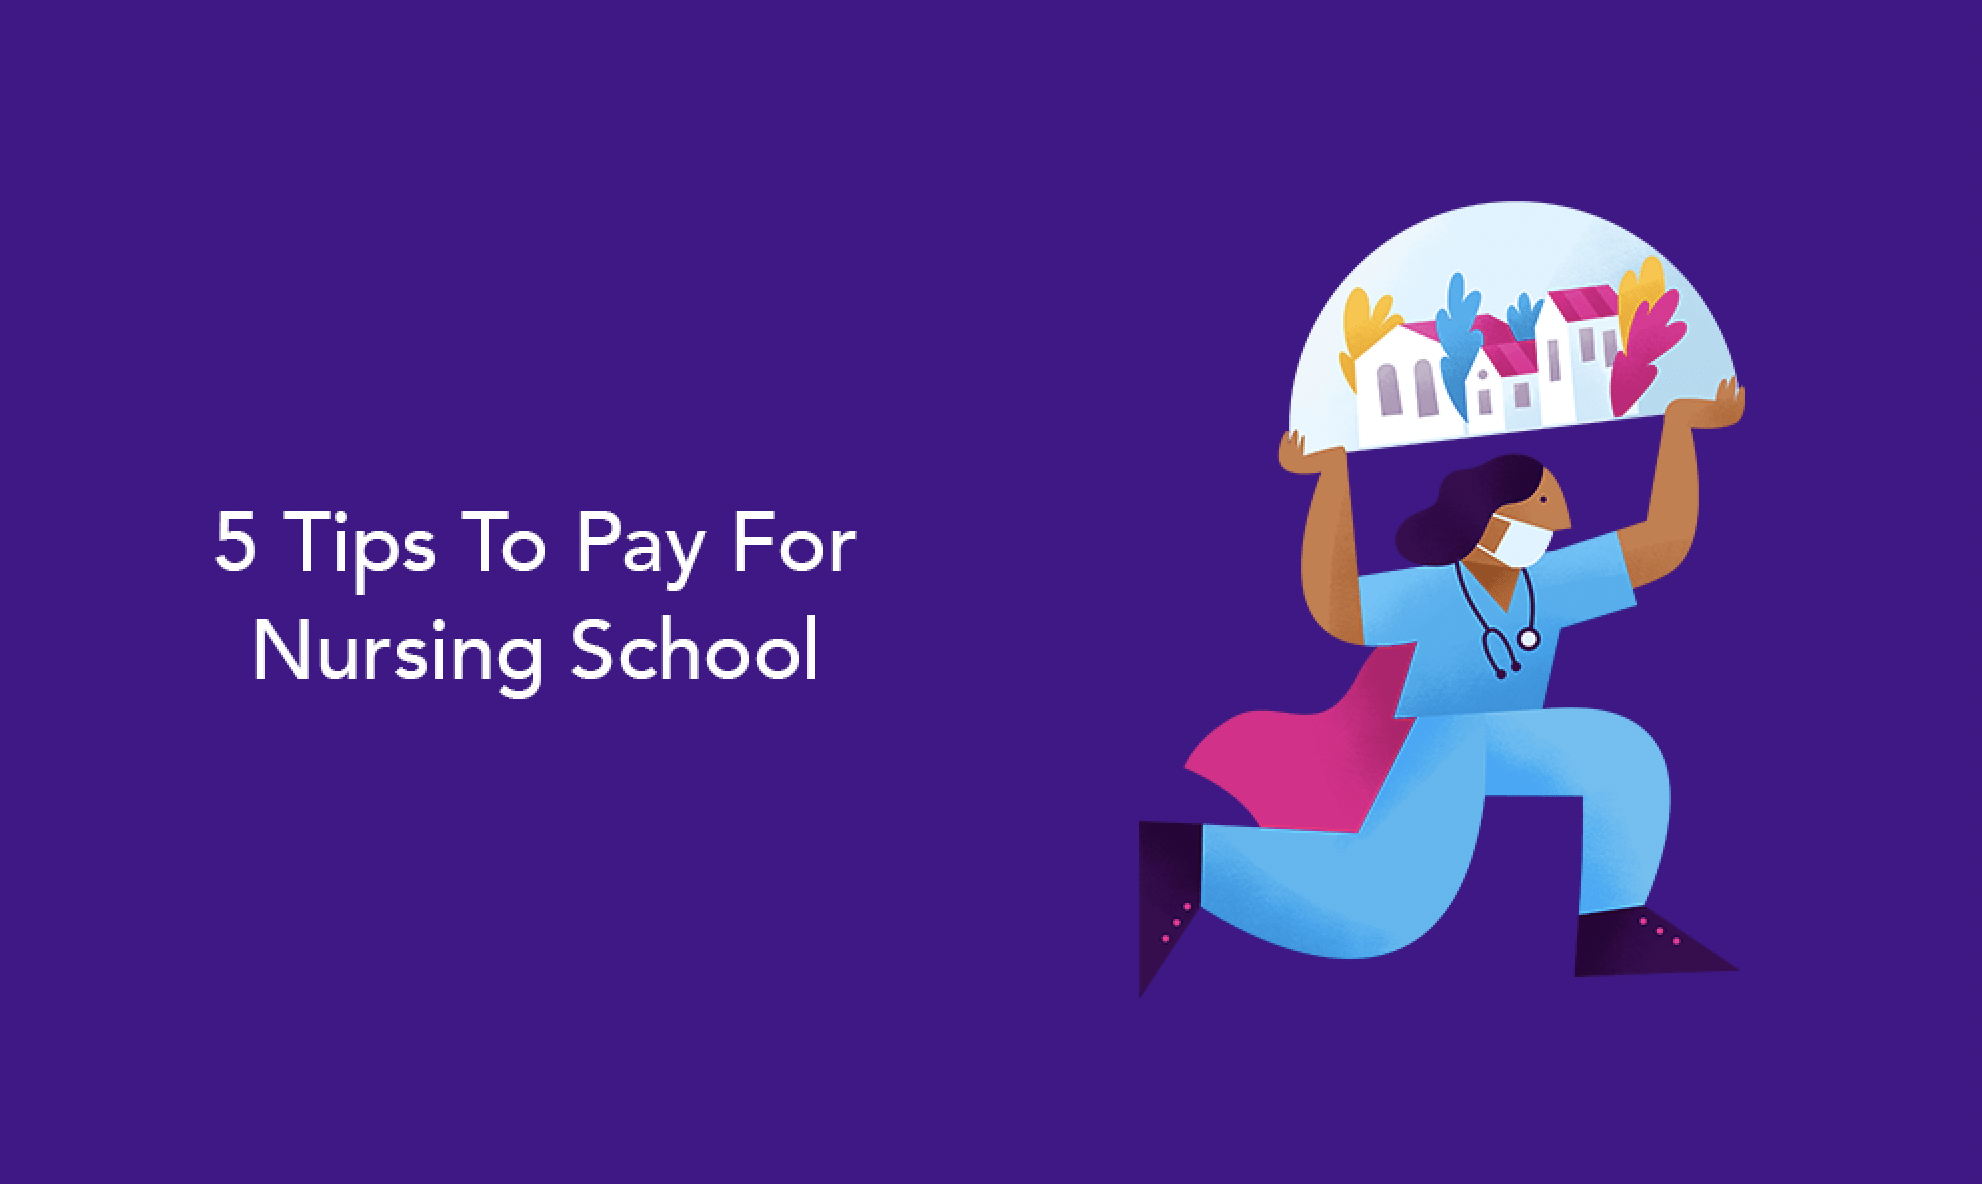 5 tips to pay for nursing school